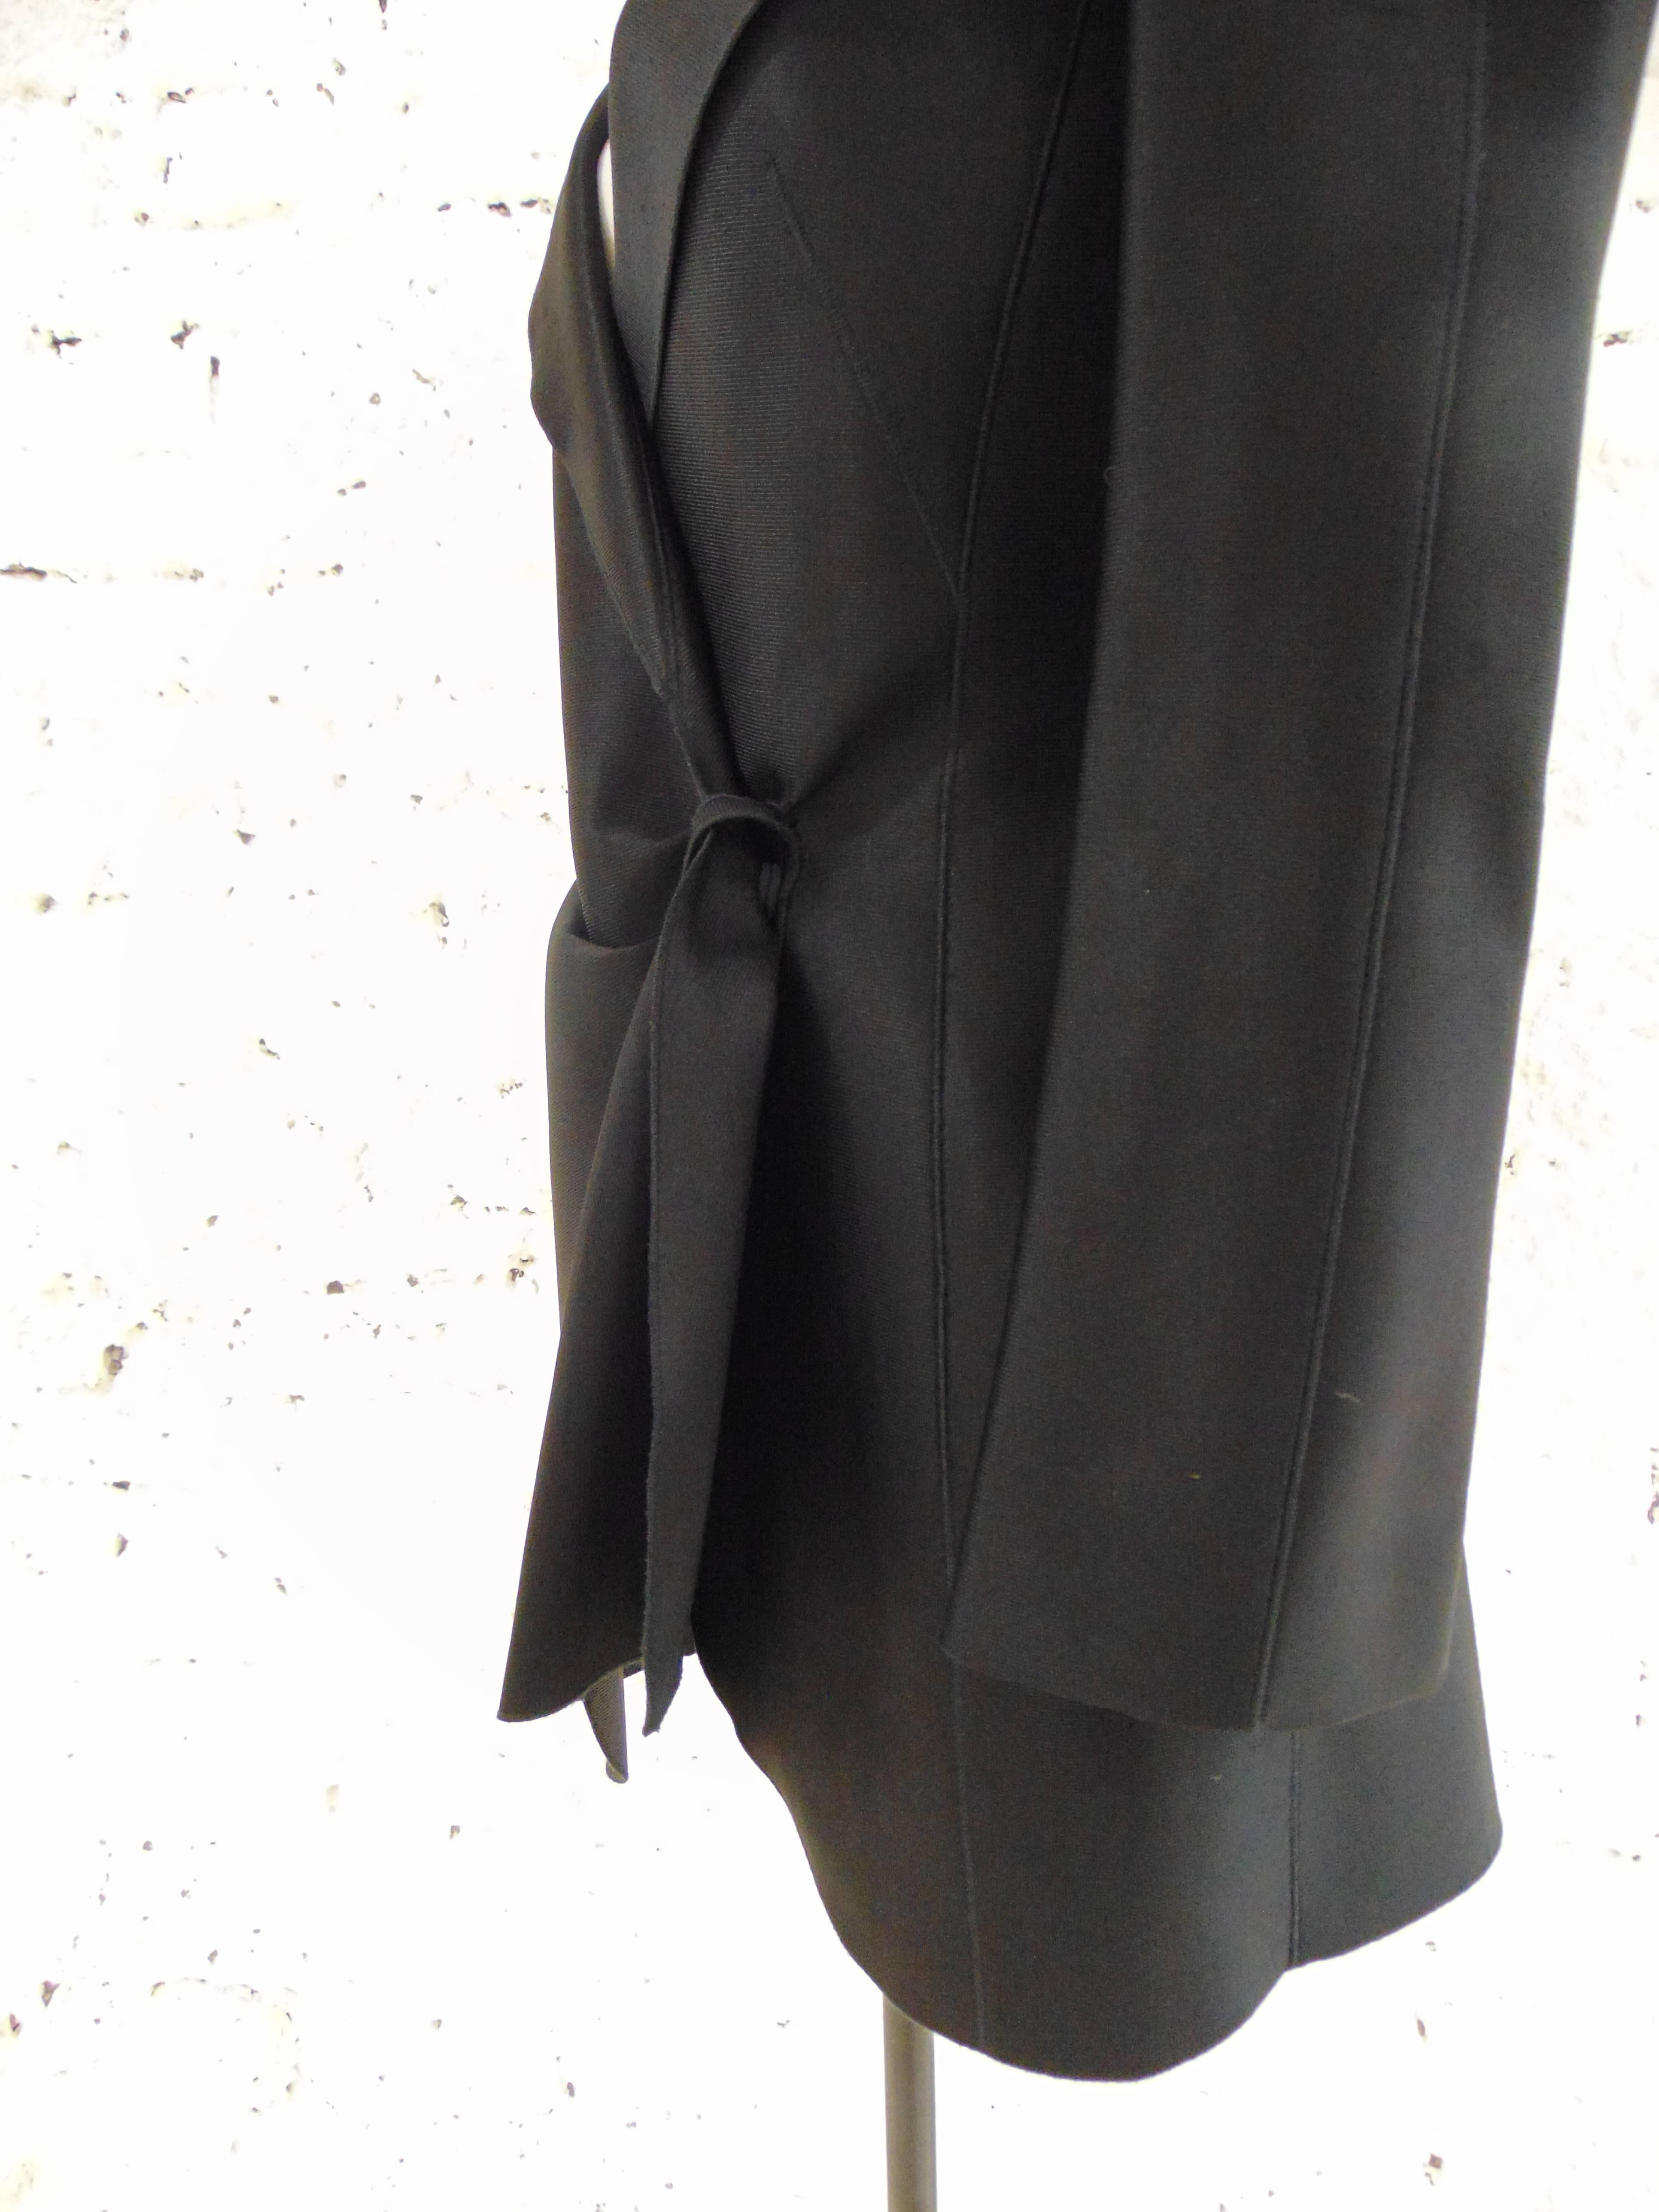 Giorgio Armani black coat
totally made in italy in size 38
composition: latex